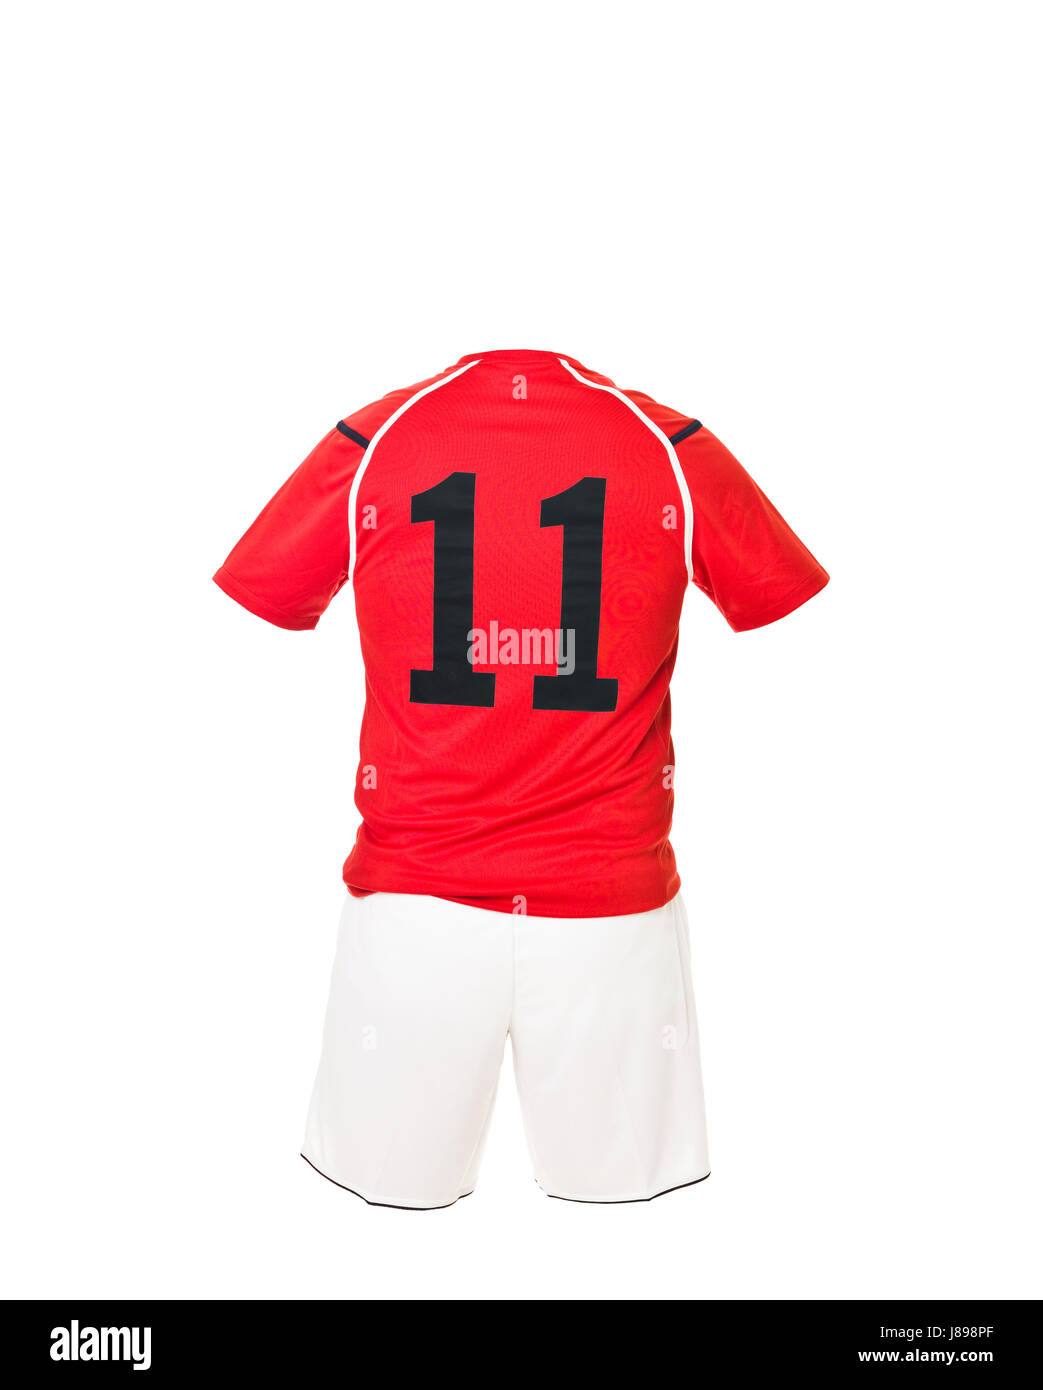 Football jersey and number 11 Stock Photos - Page 1 : Masterfile